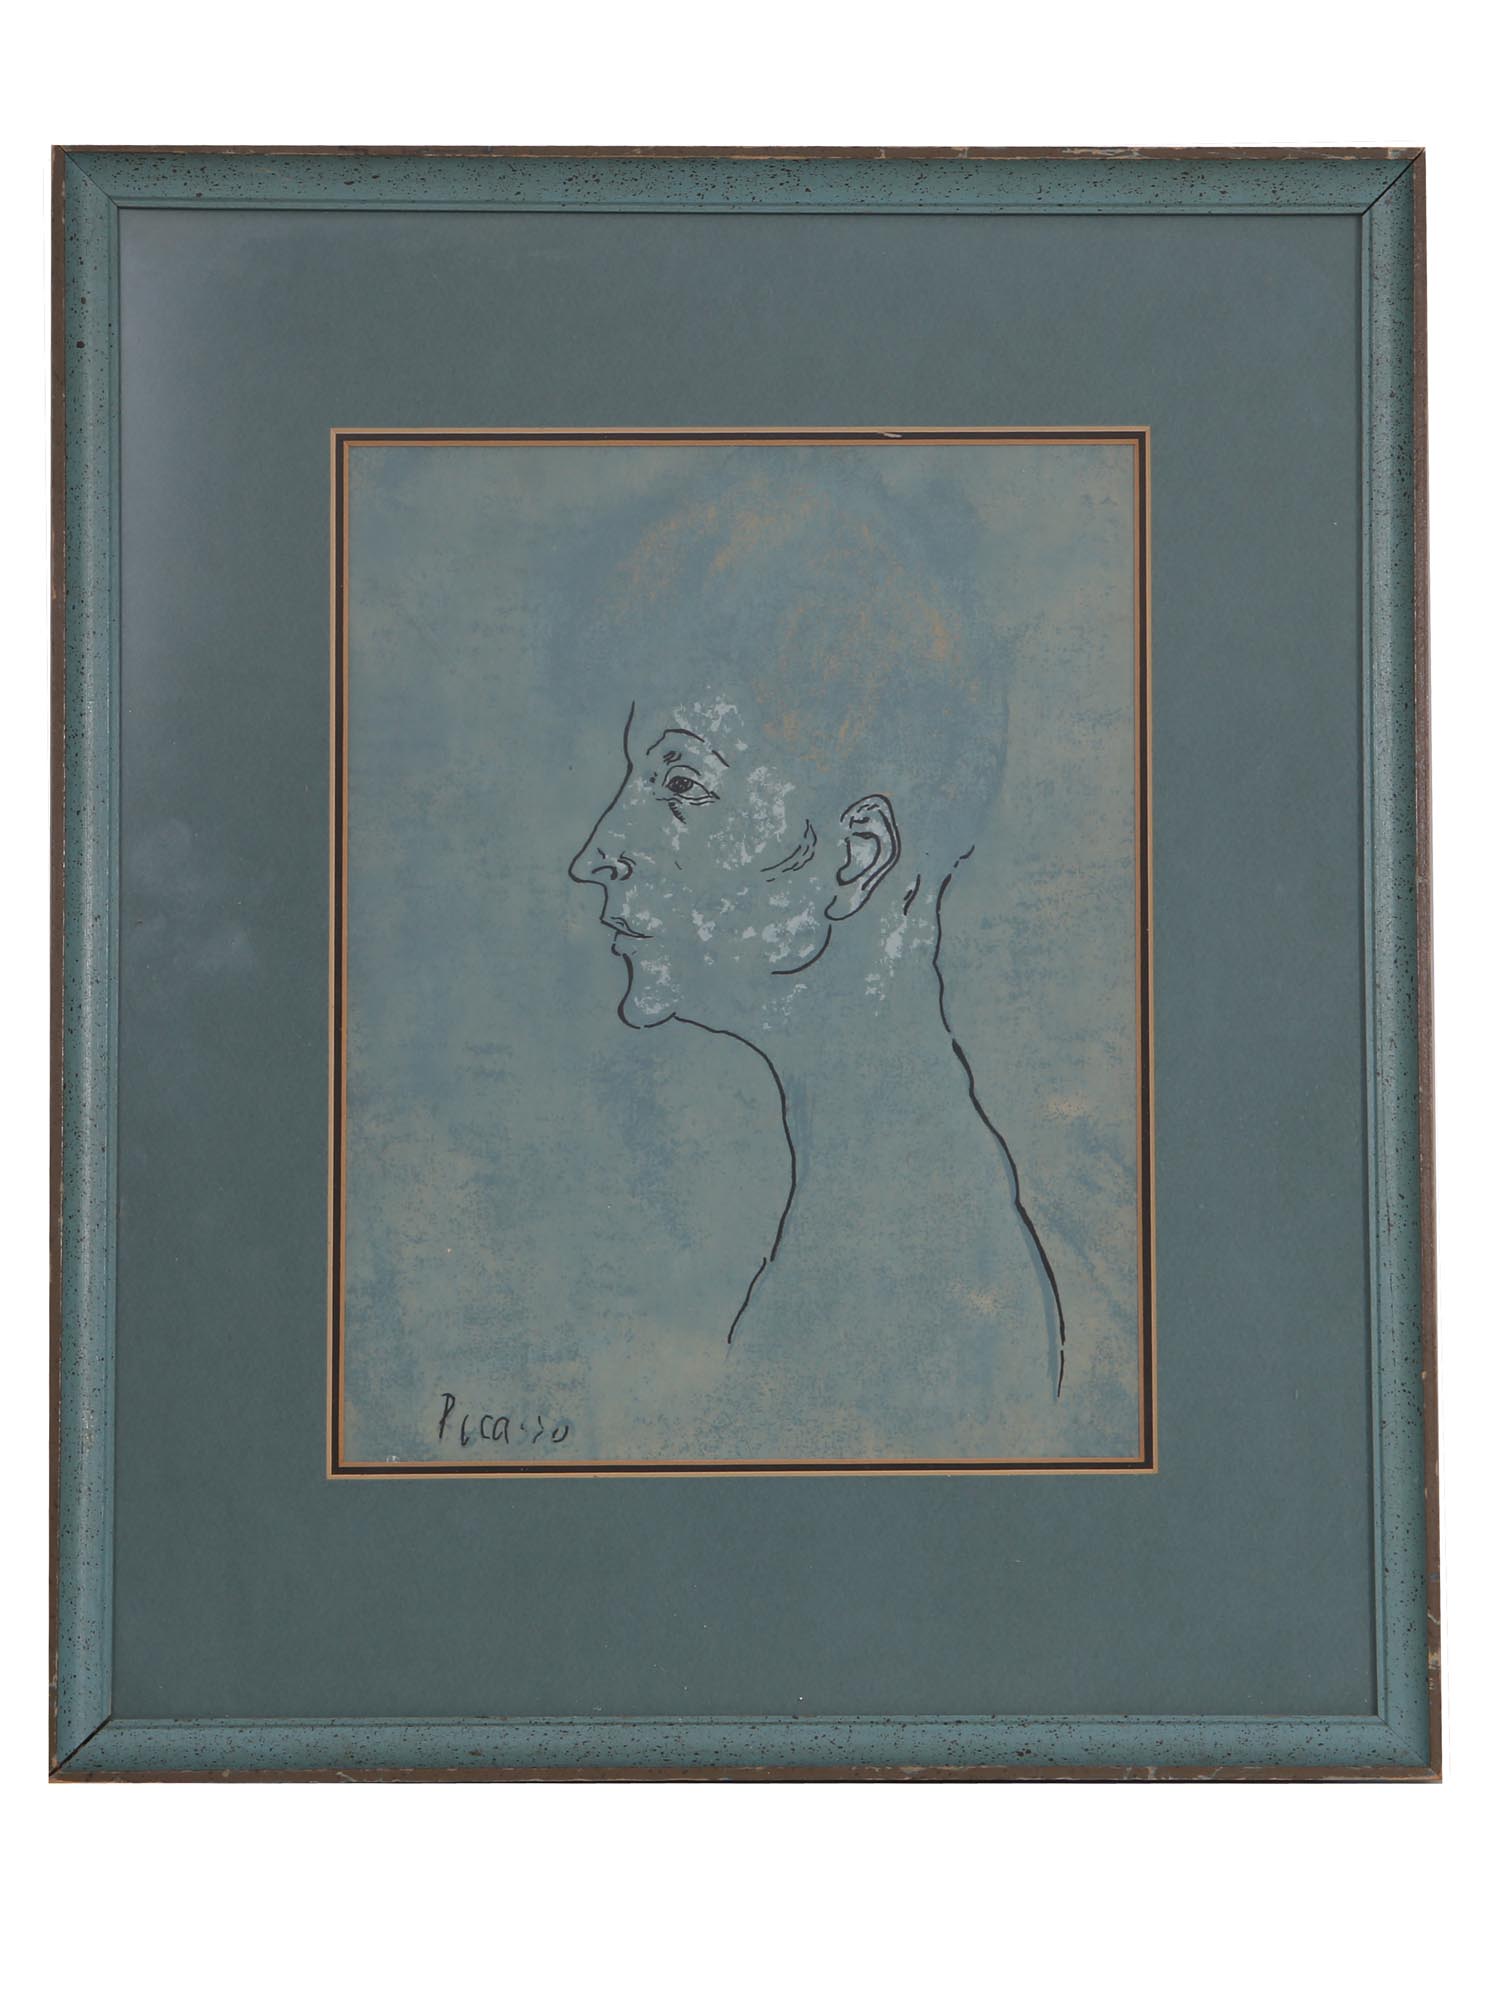 A LITHOGRAPH BY PABLO PICASSO BLUE PERIOD SIGNED PIC-0